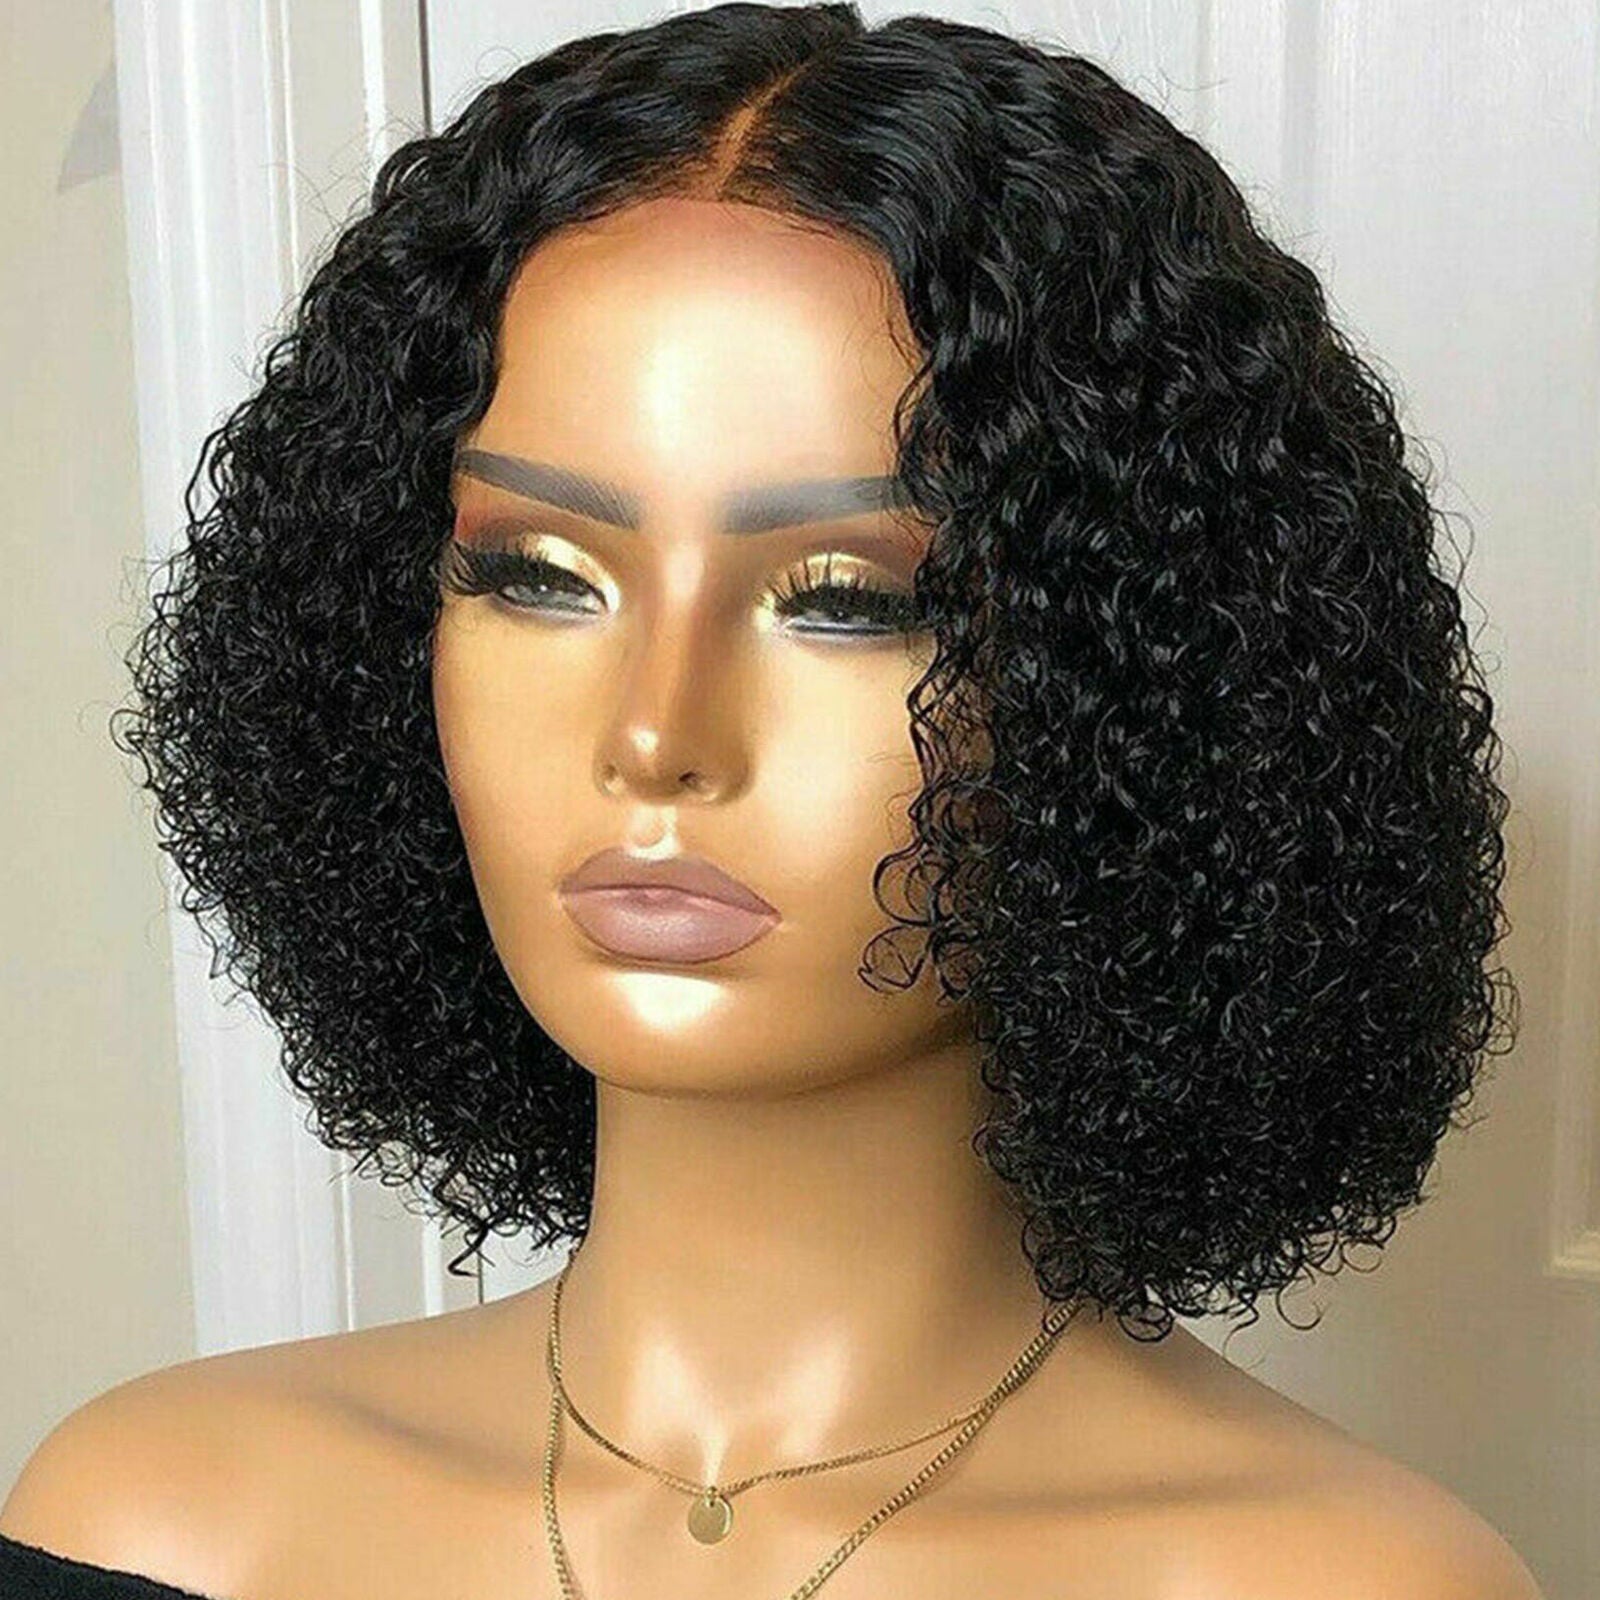 Women Black Wavy Curly Bob Short Hair Wig Synthetic Soft Natural Looking Wigs